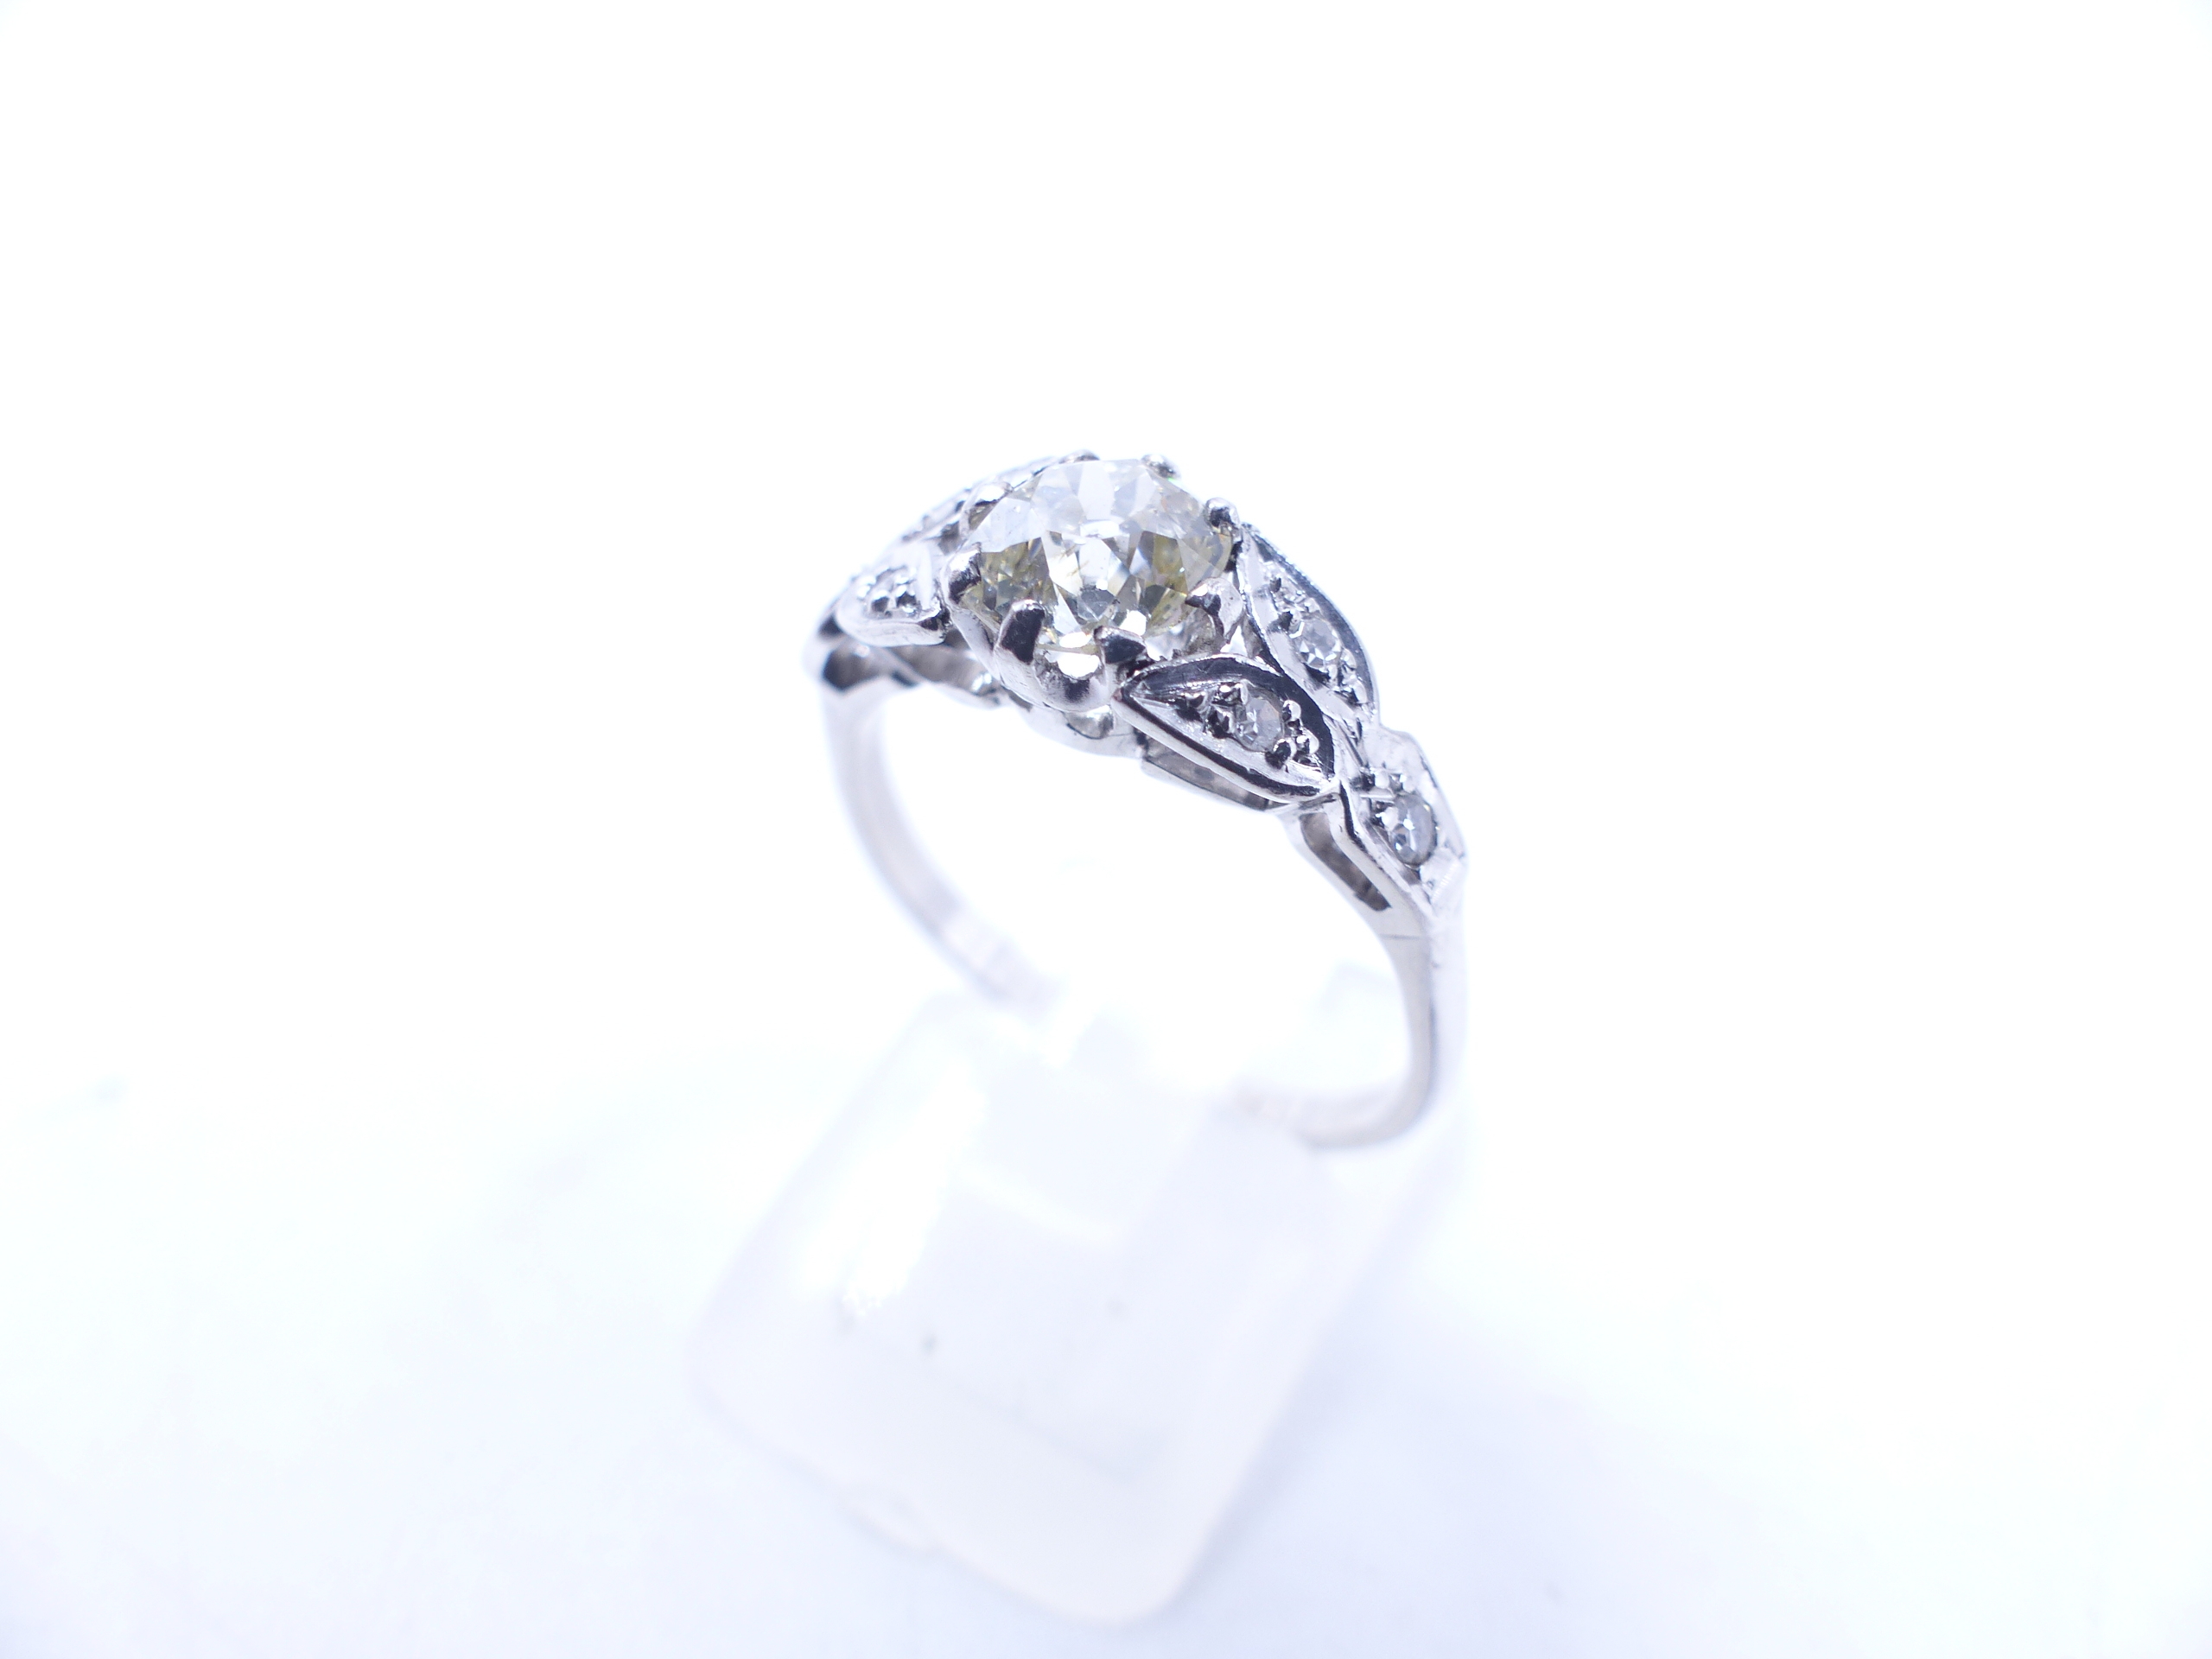 AN 18ct STAMPED OLD CUT DIAMOND RING. THE CENTRAL OLD CUT DIAMOND IS HELD IN AN EIGHT CLAW SETTING - Image 4 of 14